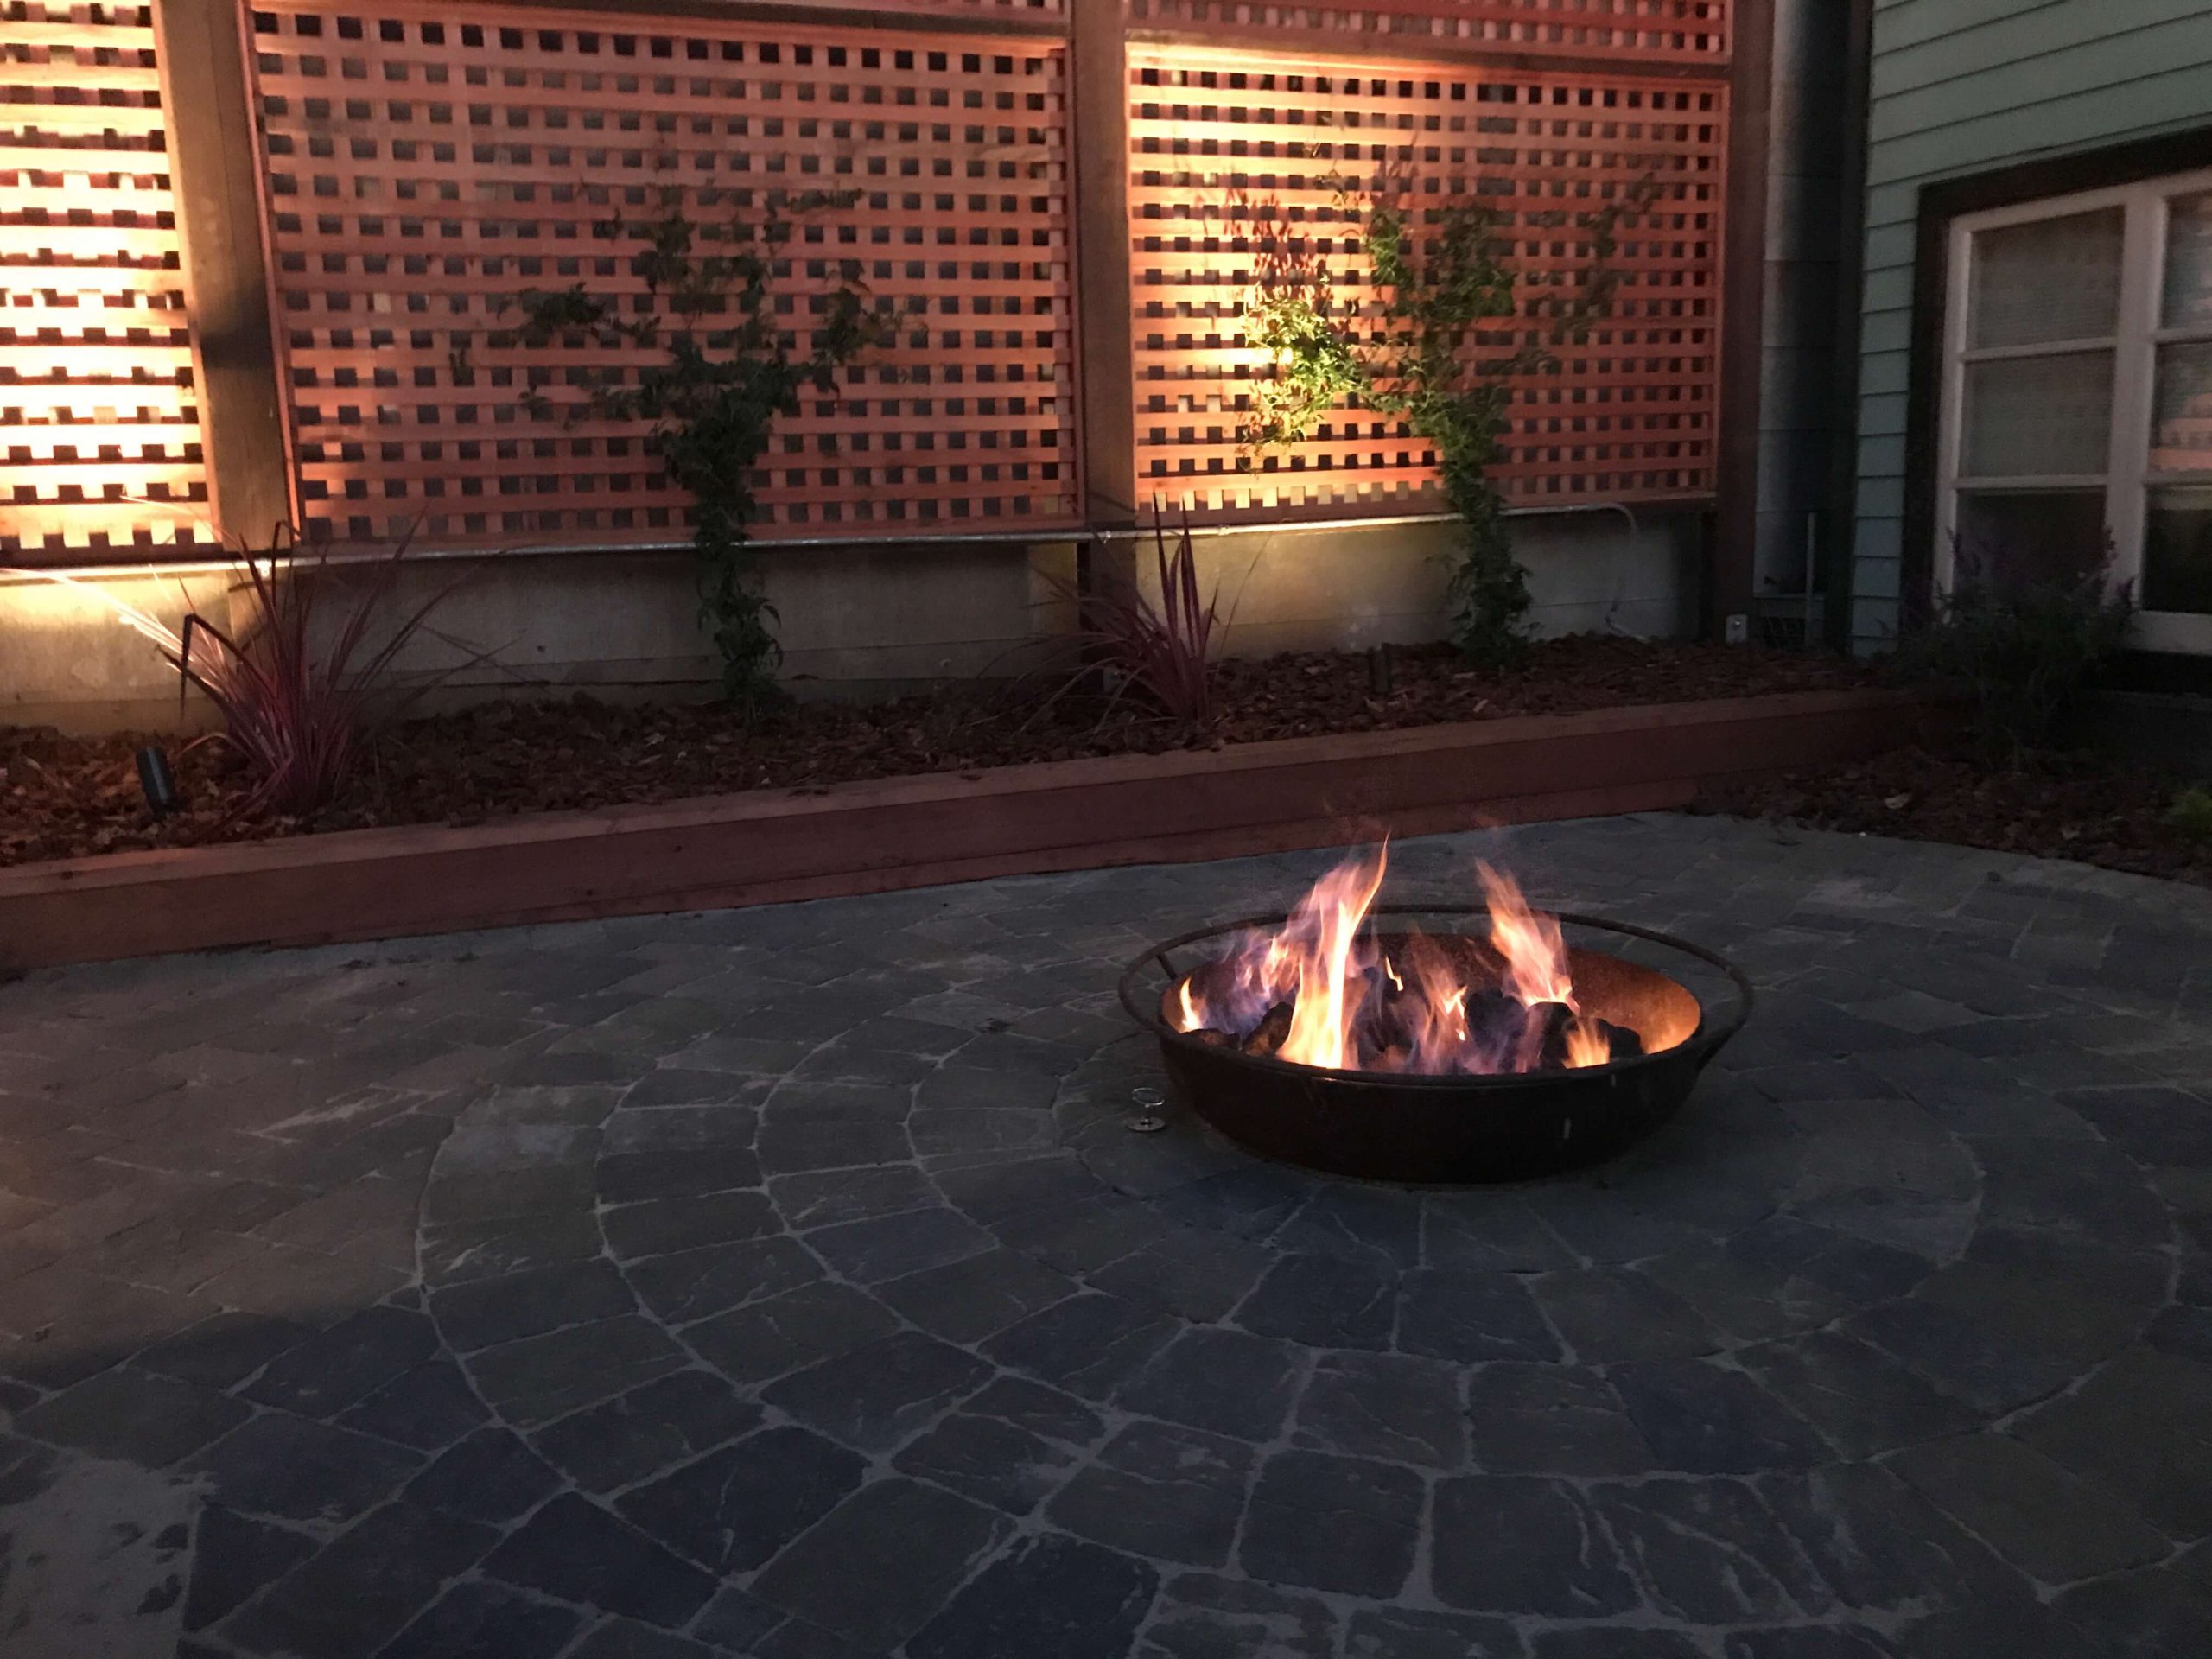 Backyard Landscape Project: Lower patio, made with interlocking pavers, holds a fire pit made from an Iron dish, customized to accept a natural gas fire ring